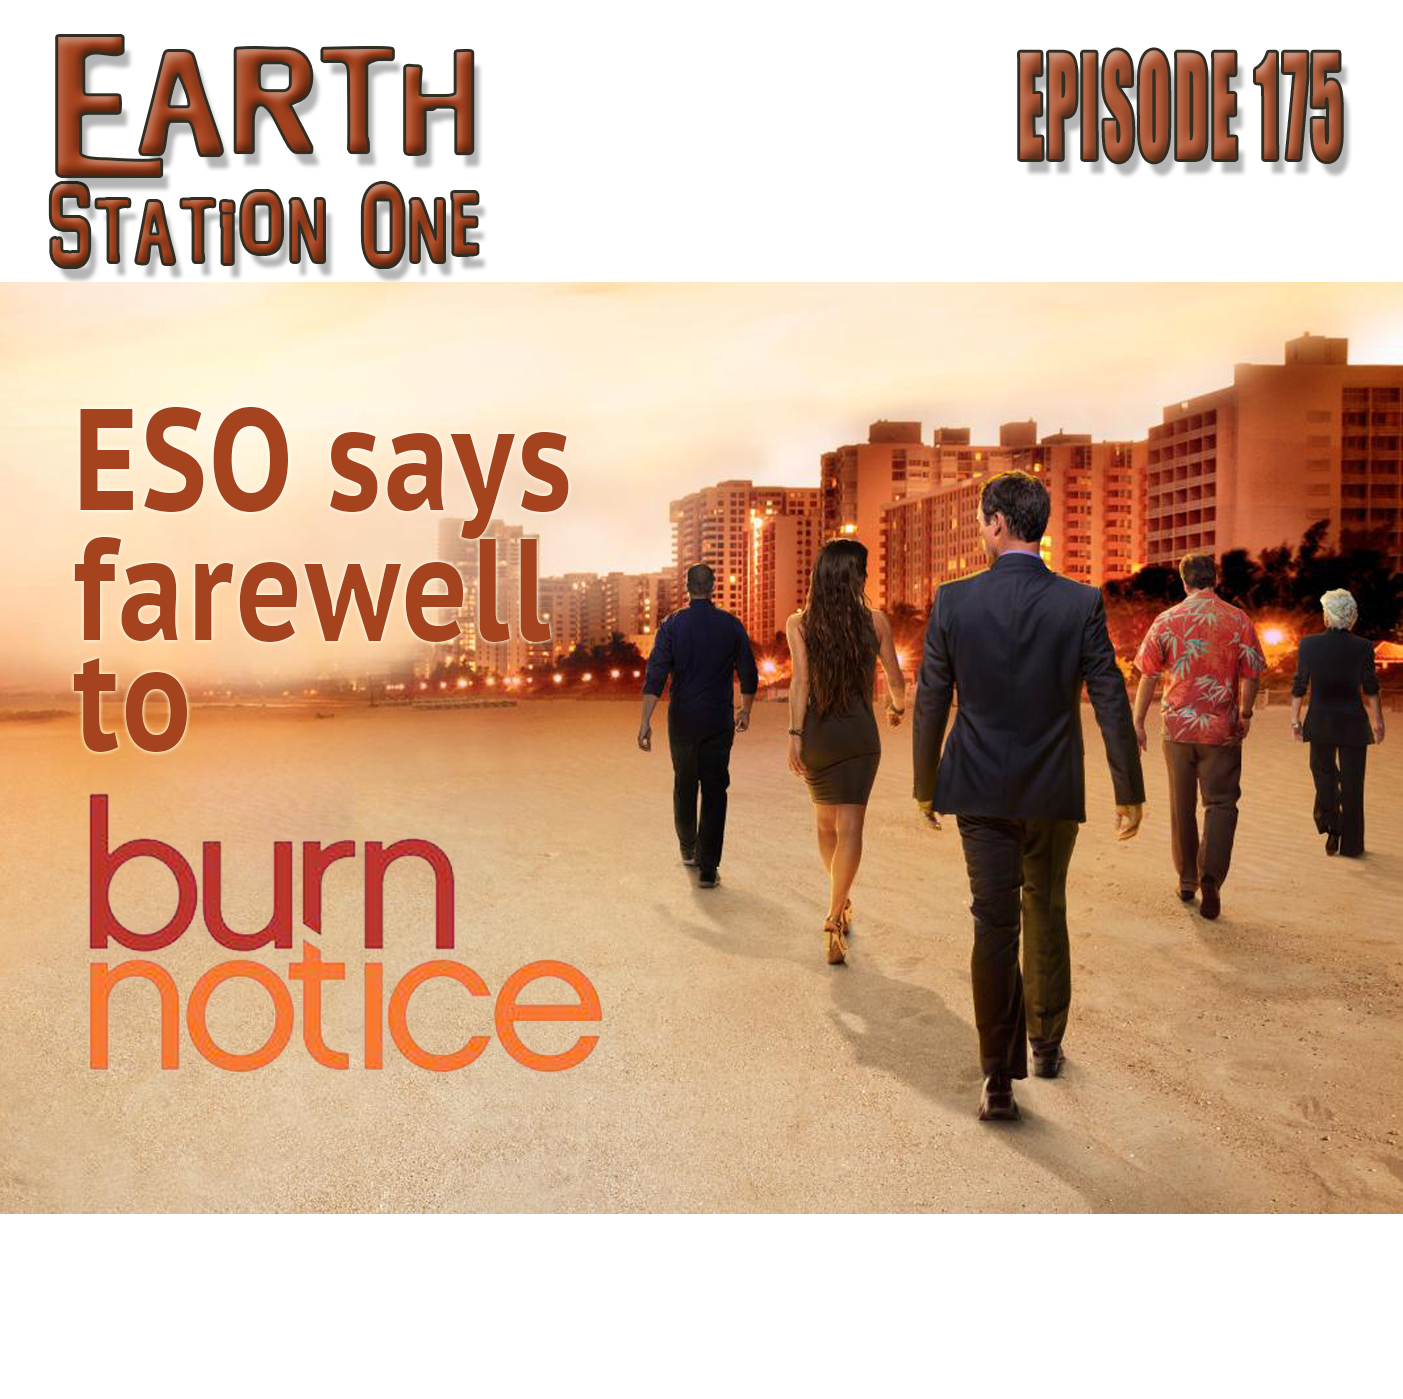 Earth Station One Episode 175